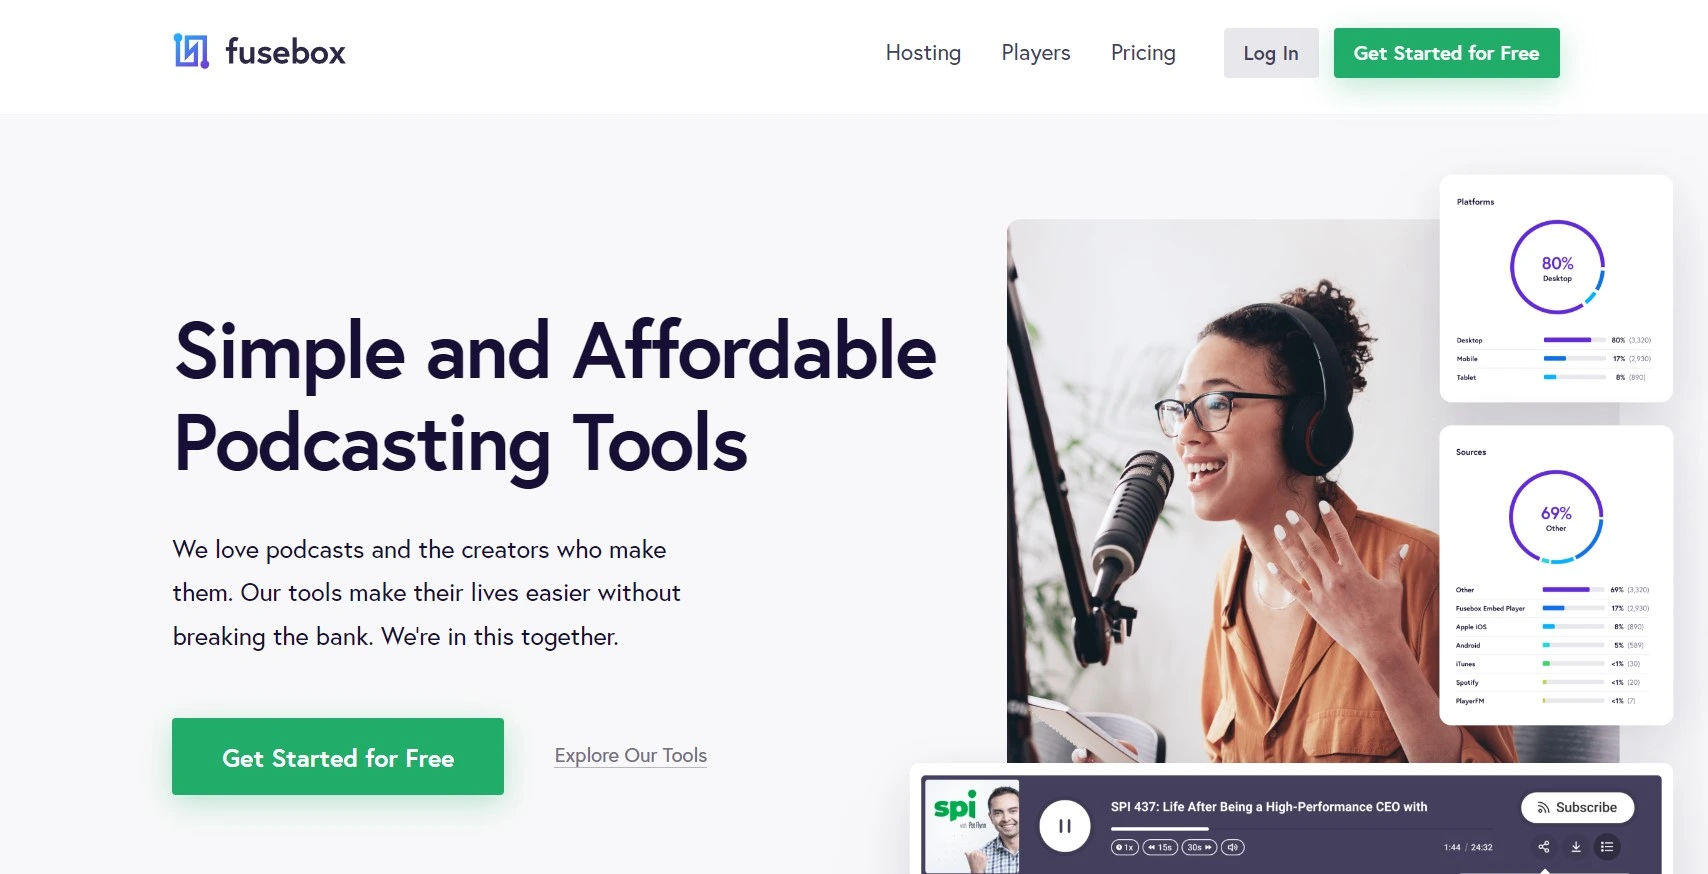 Fusebox provides affordable and simple podcasting tools